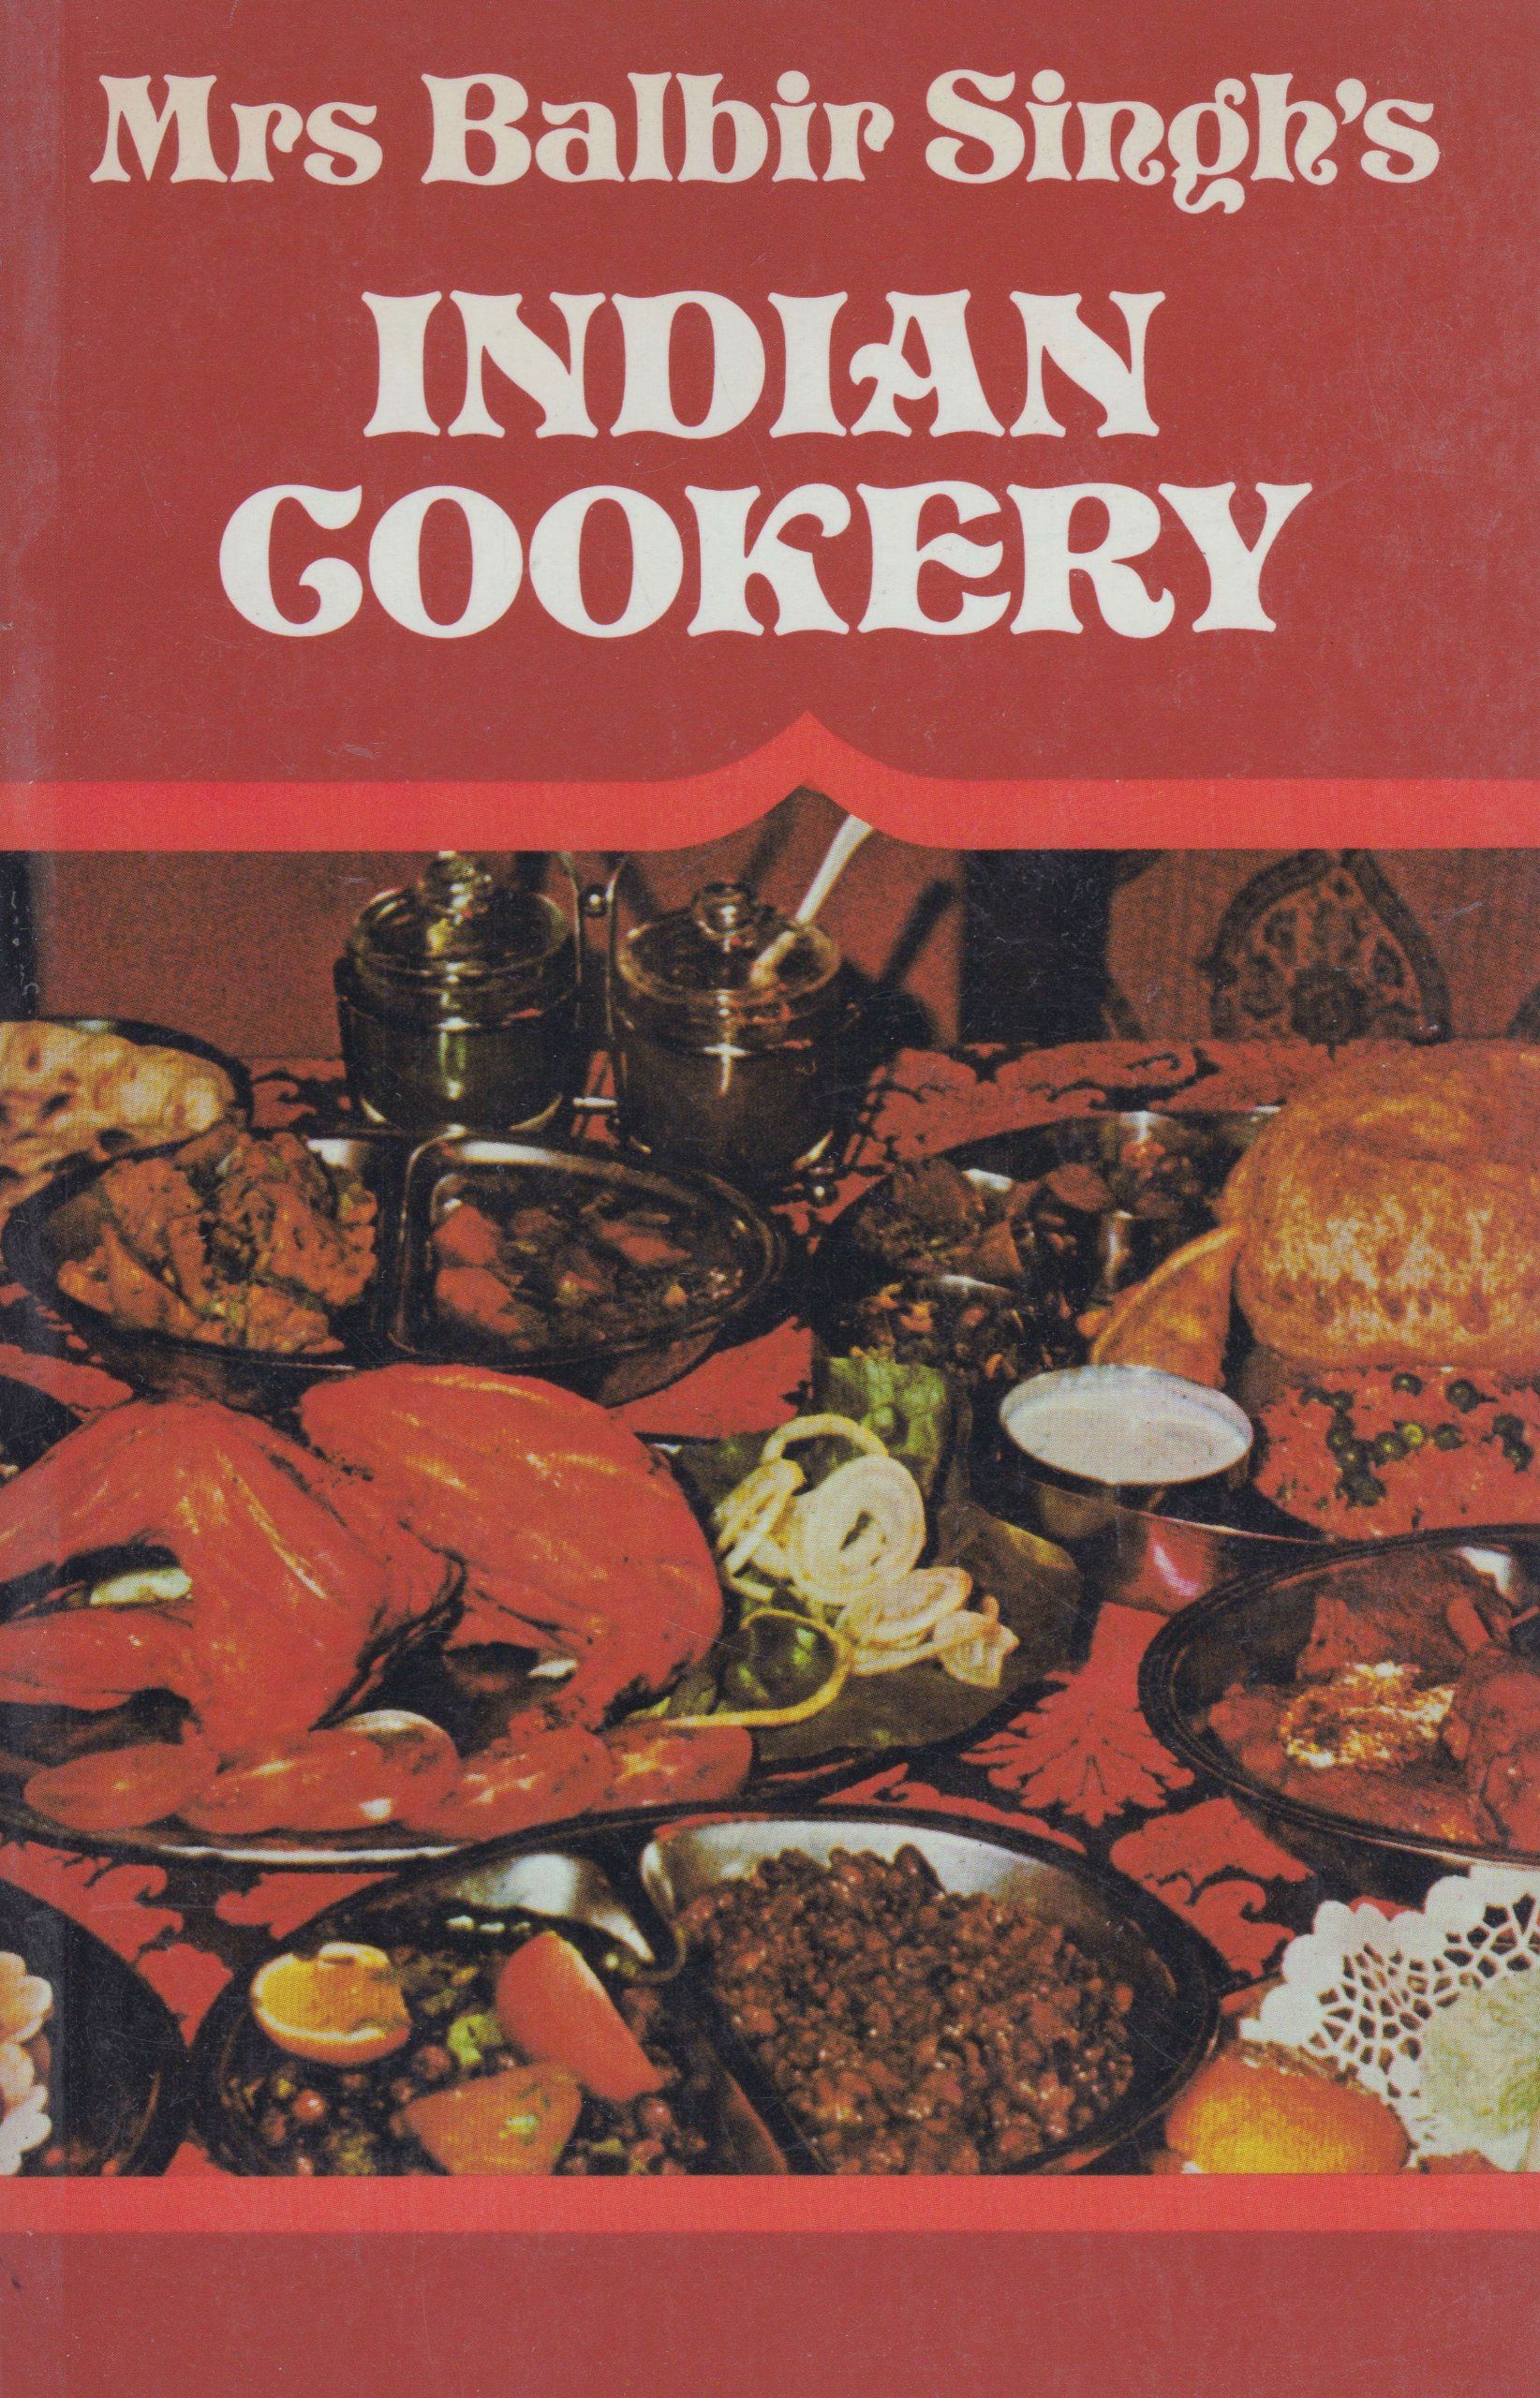 Mrs Balbir Singh's Indian Cookery cover